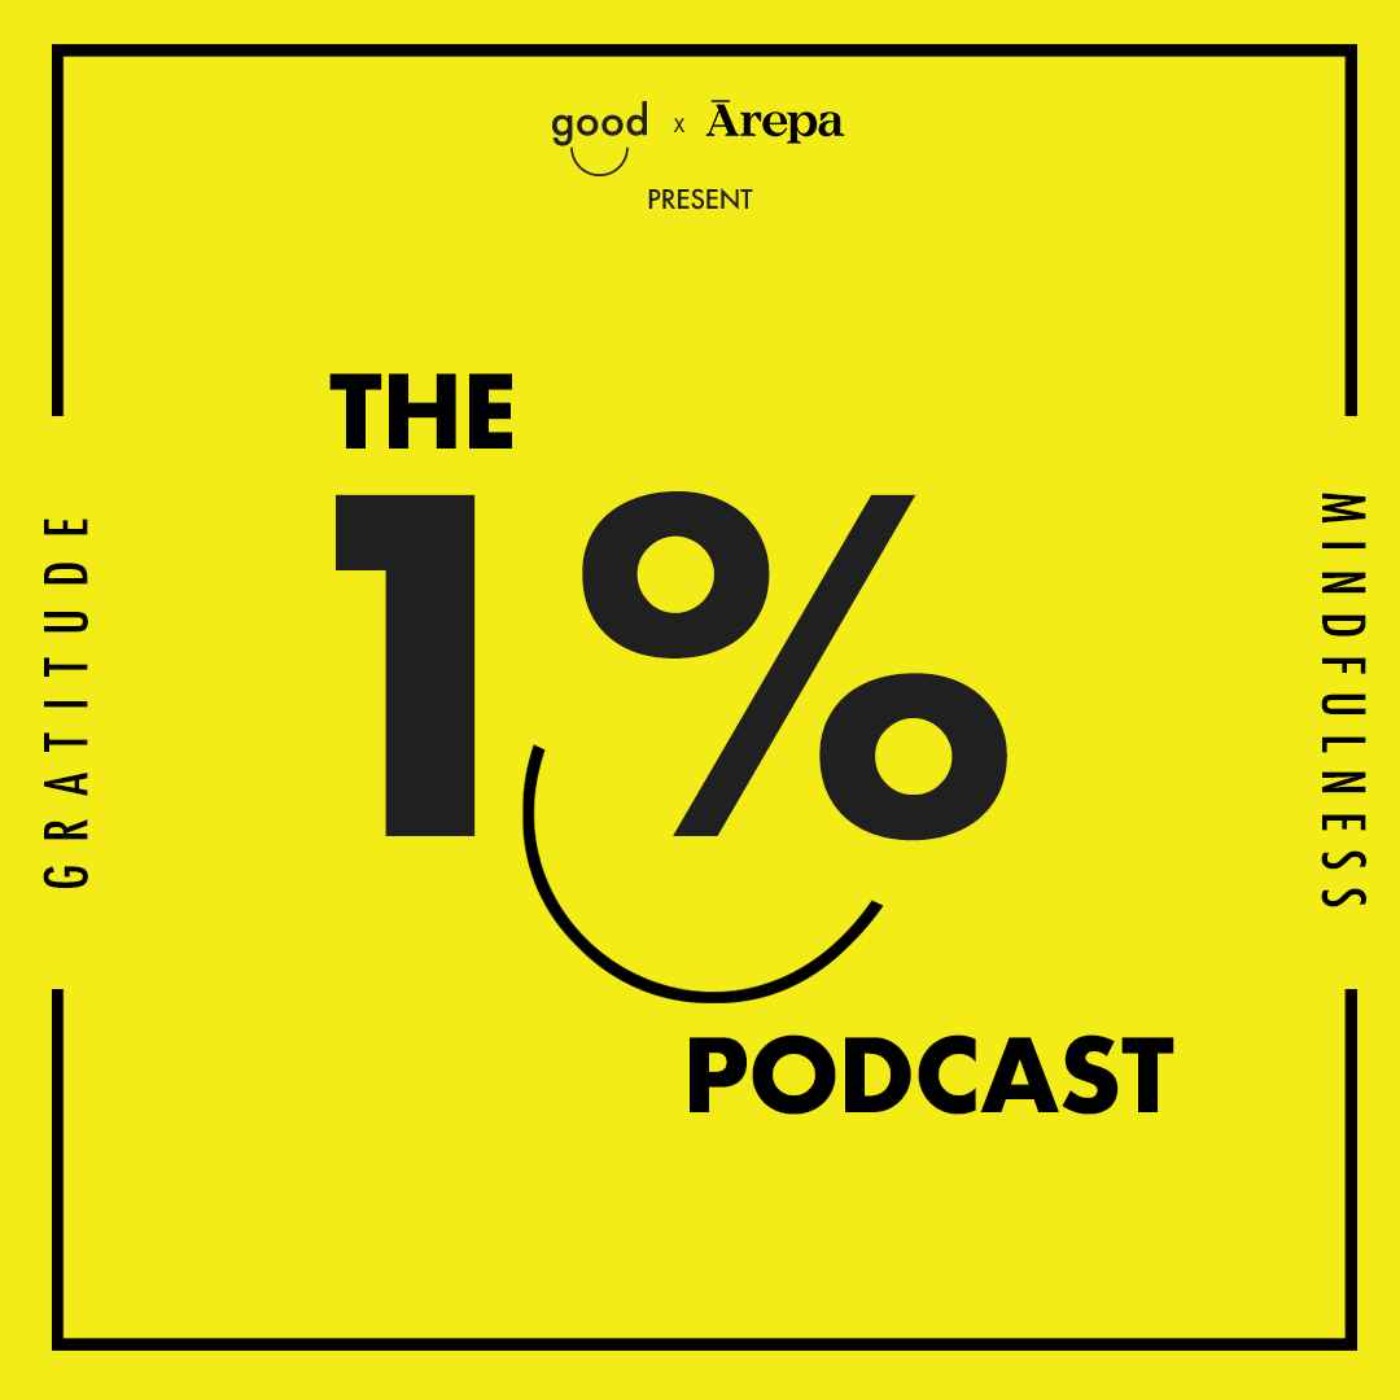 1% Pod - The best music is....